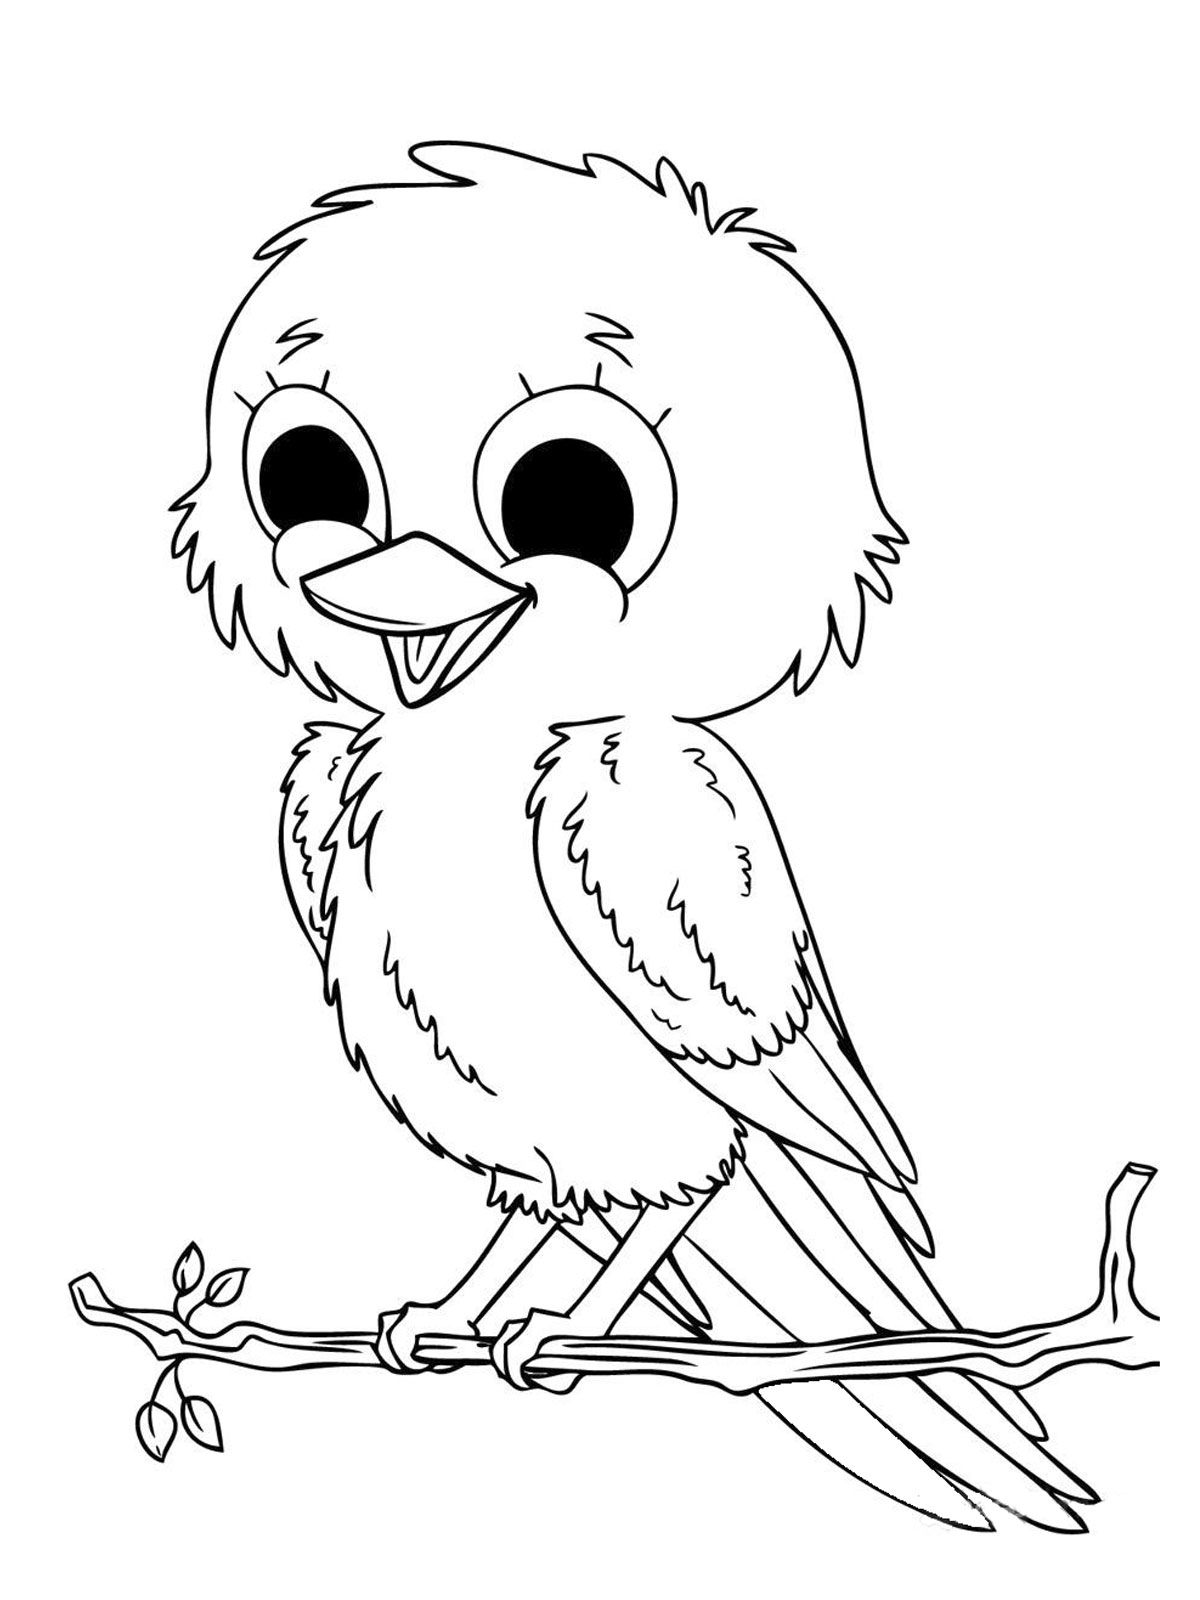 Animal Coloring Pages For Teens - Coloring Home